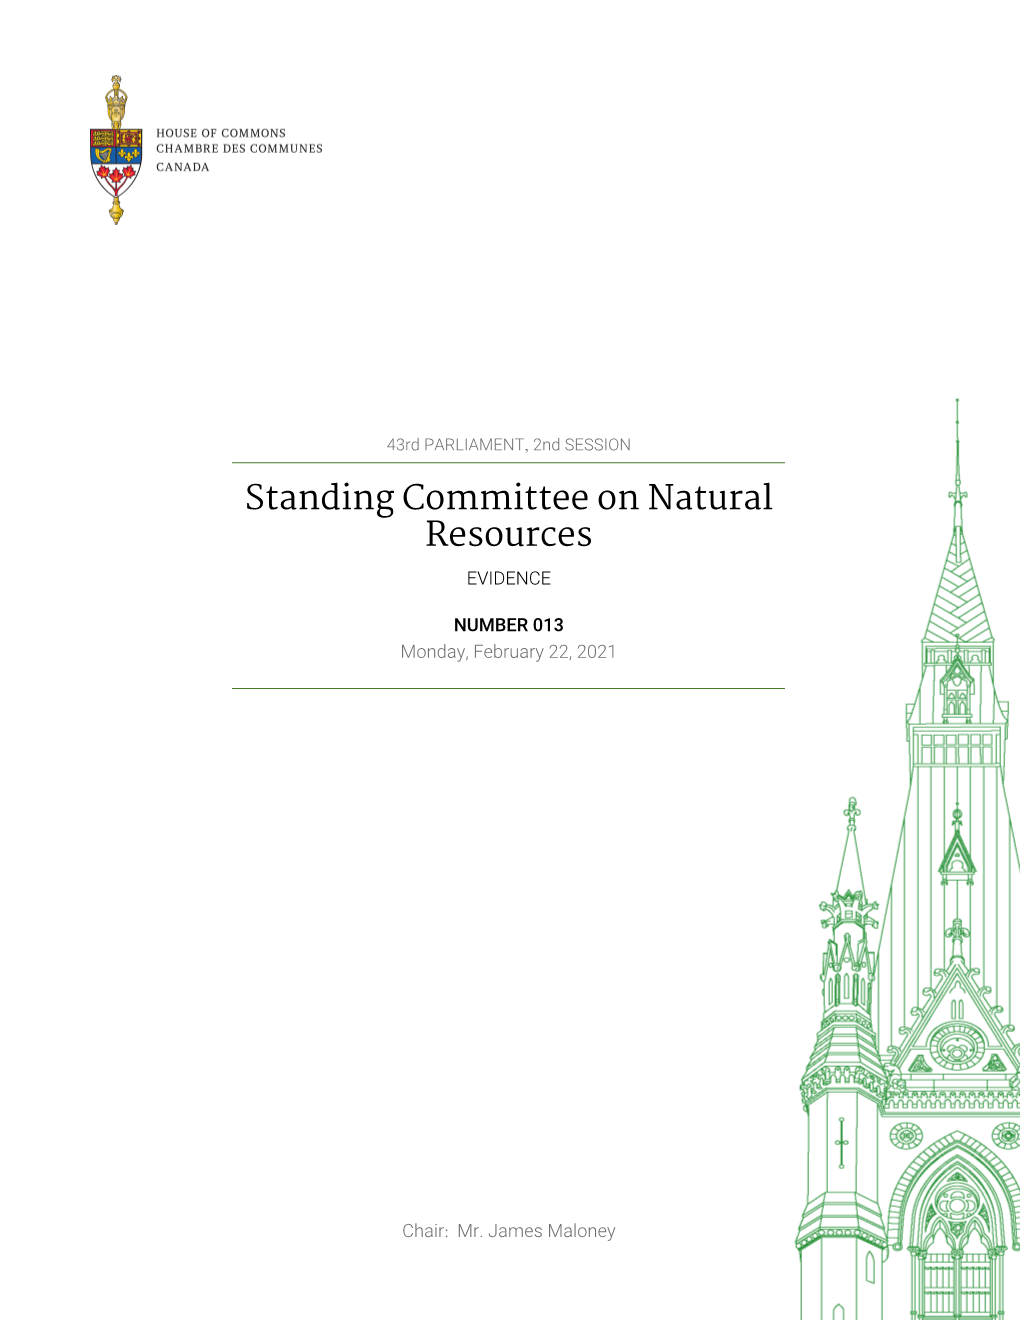 Evidence of the Standing Committee on Natural Resources